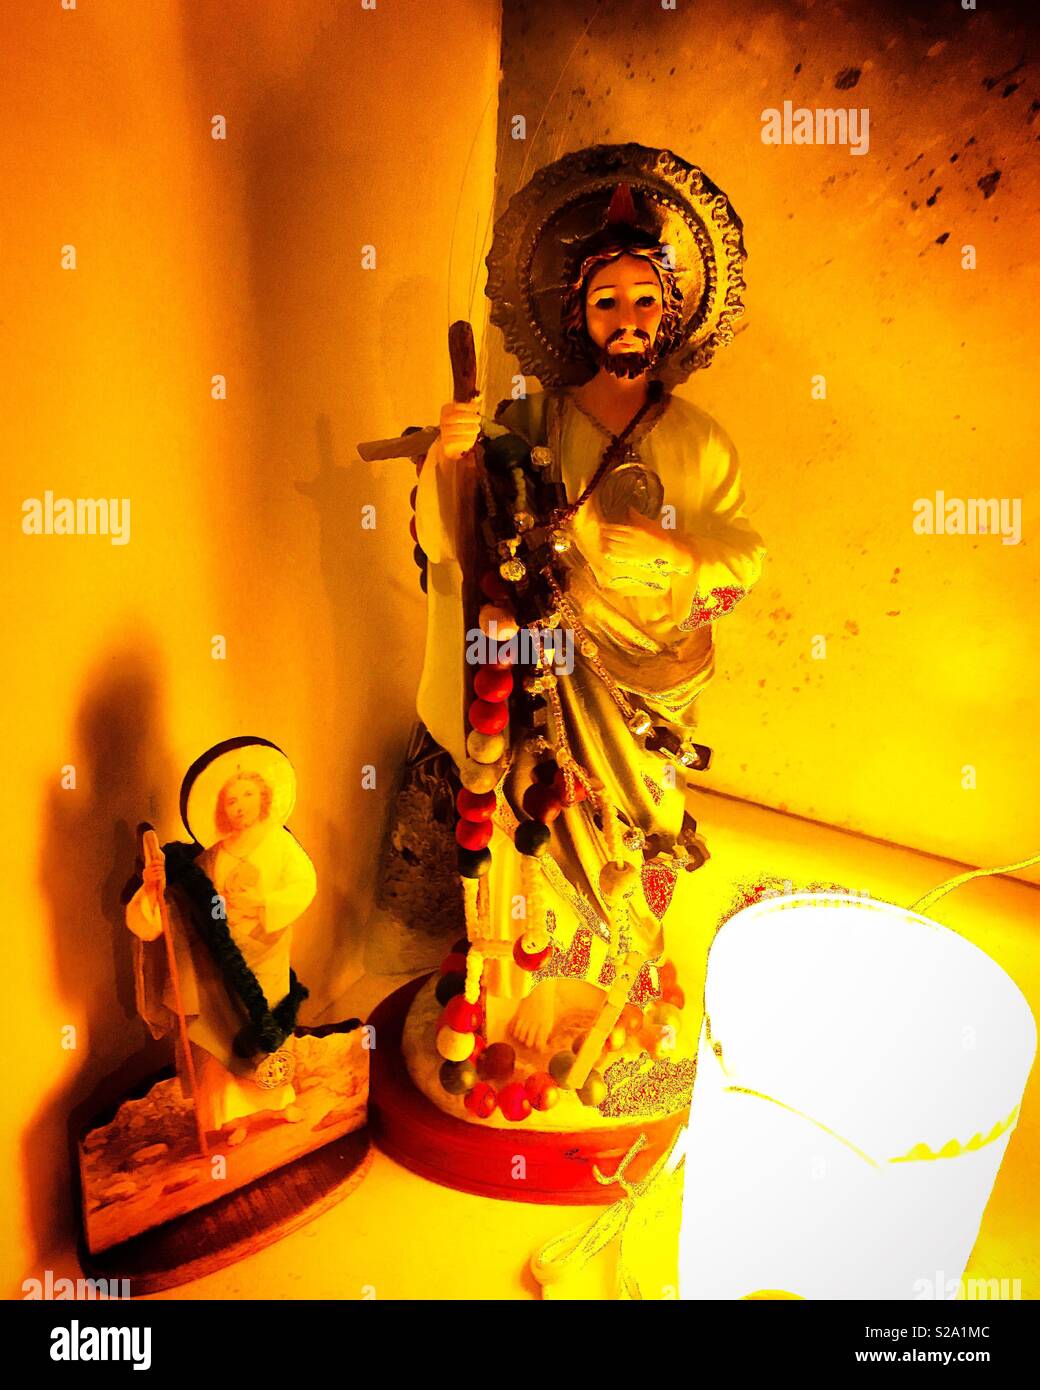 Images of Saint Jude Thaddeus decorate a home in Mexico City, Mexico Stock Photo